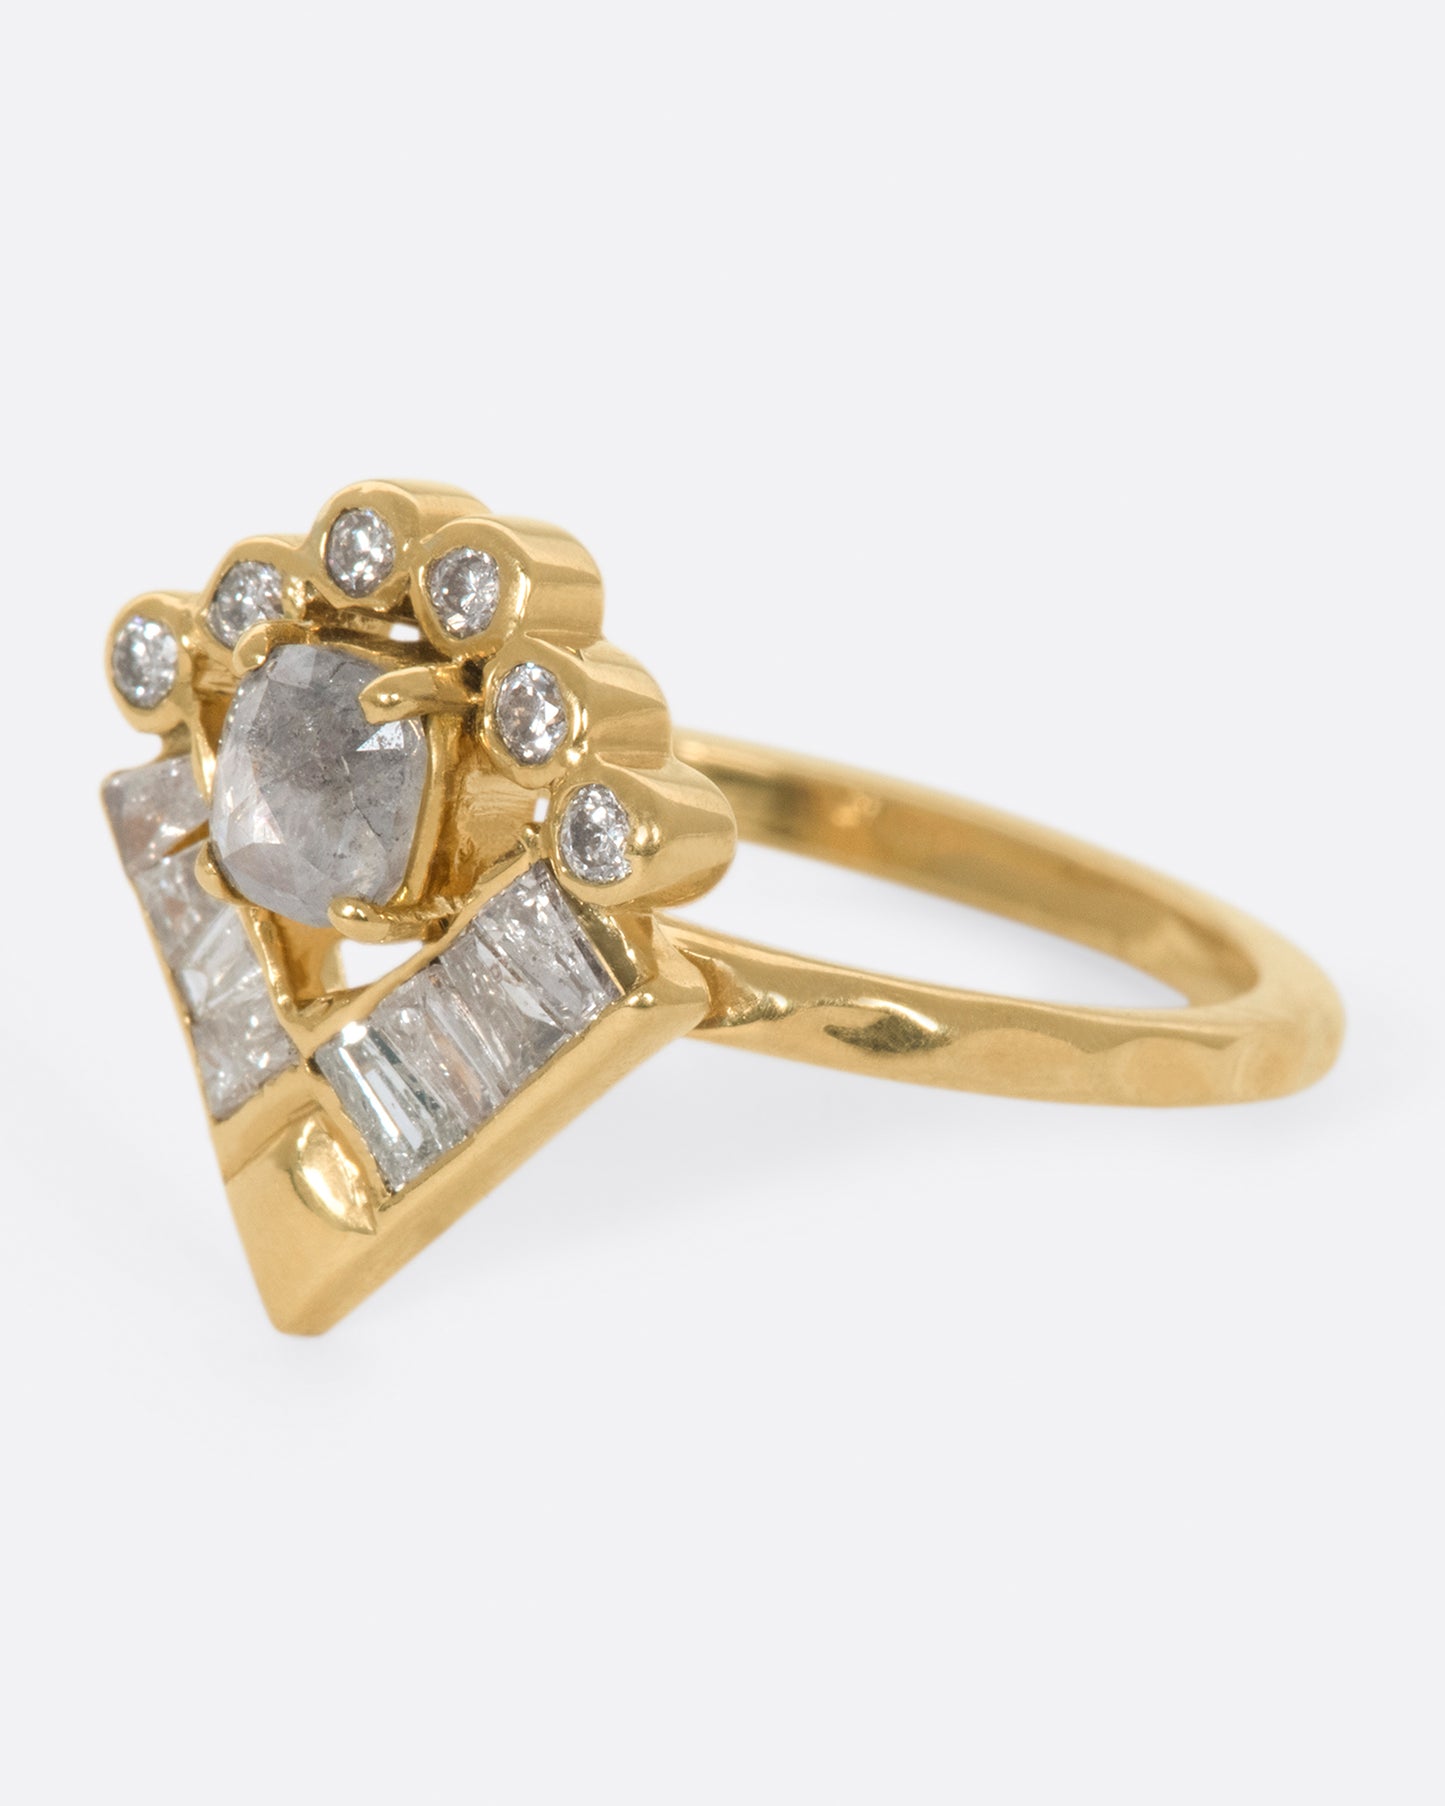 A ring that encompasses a little bit of everything; geometry, a halo, a textured band, round and baguette diamonds, and an oval rose cut salt & pepper diamond at its center.